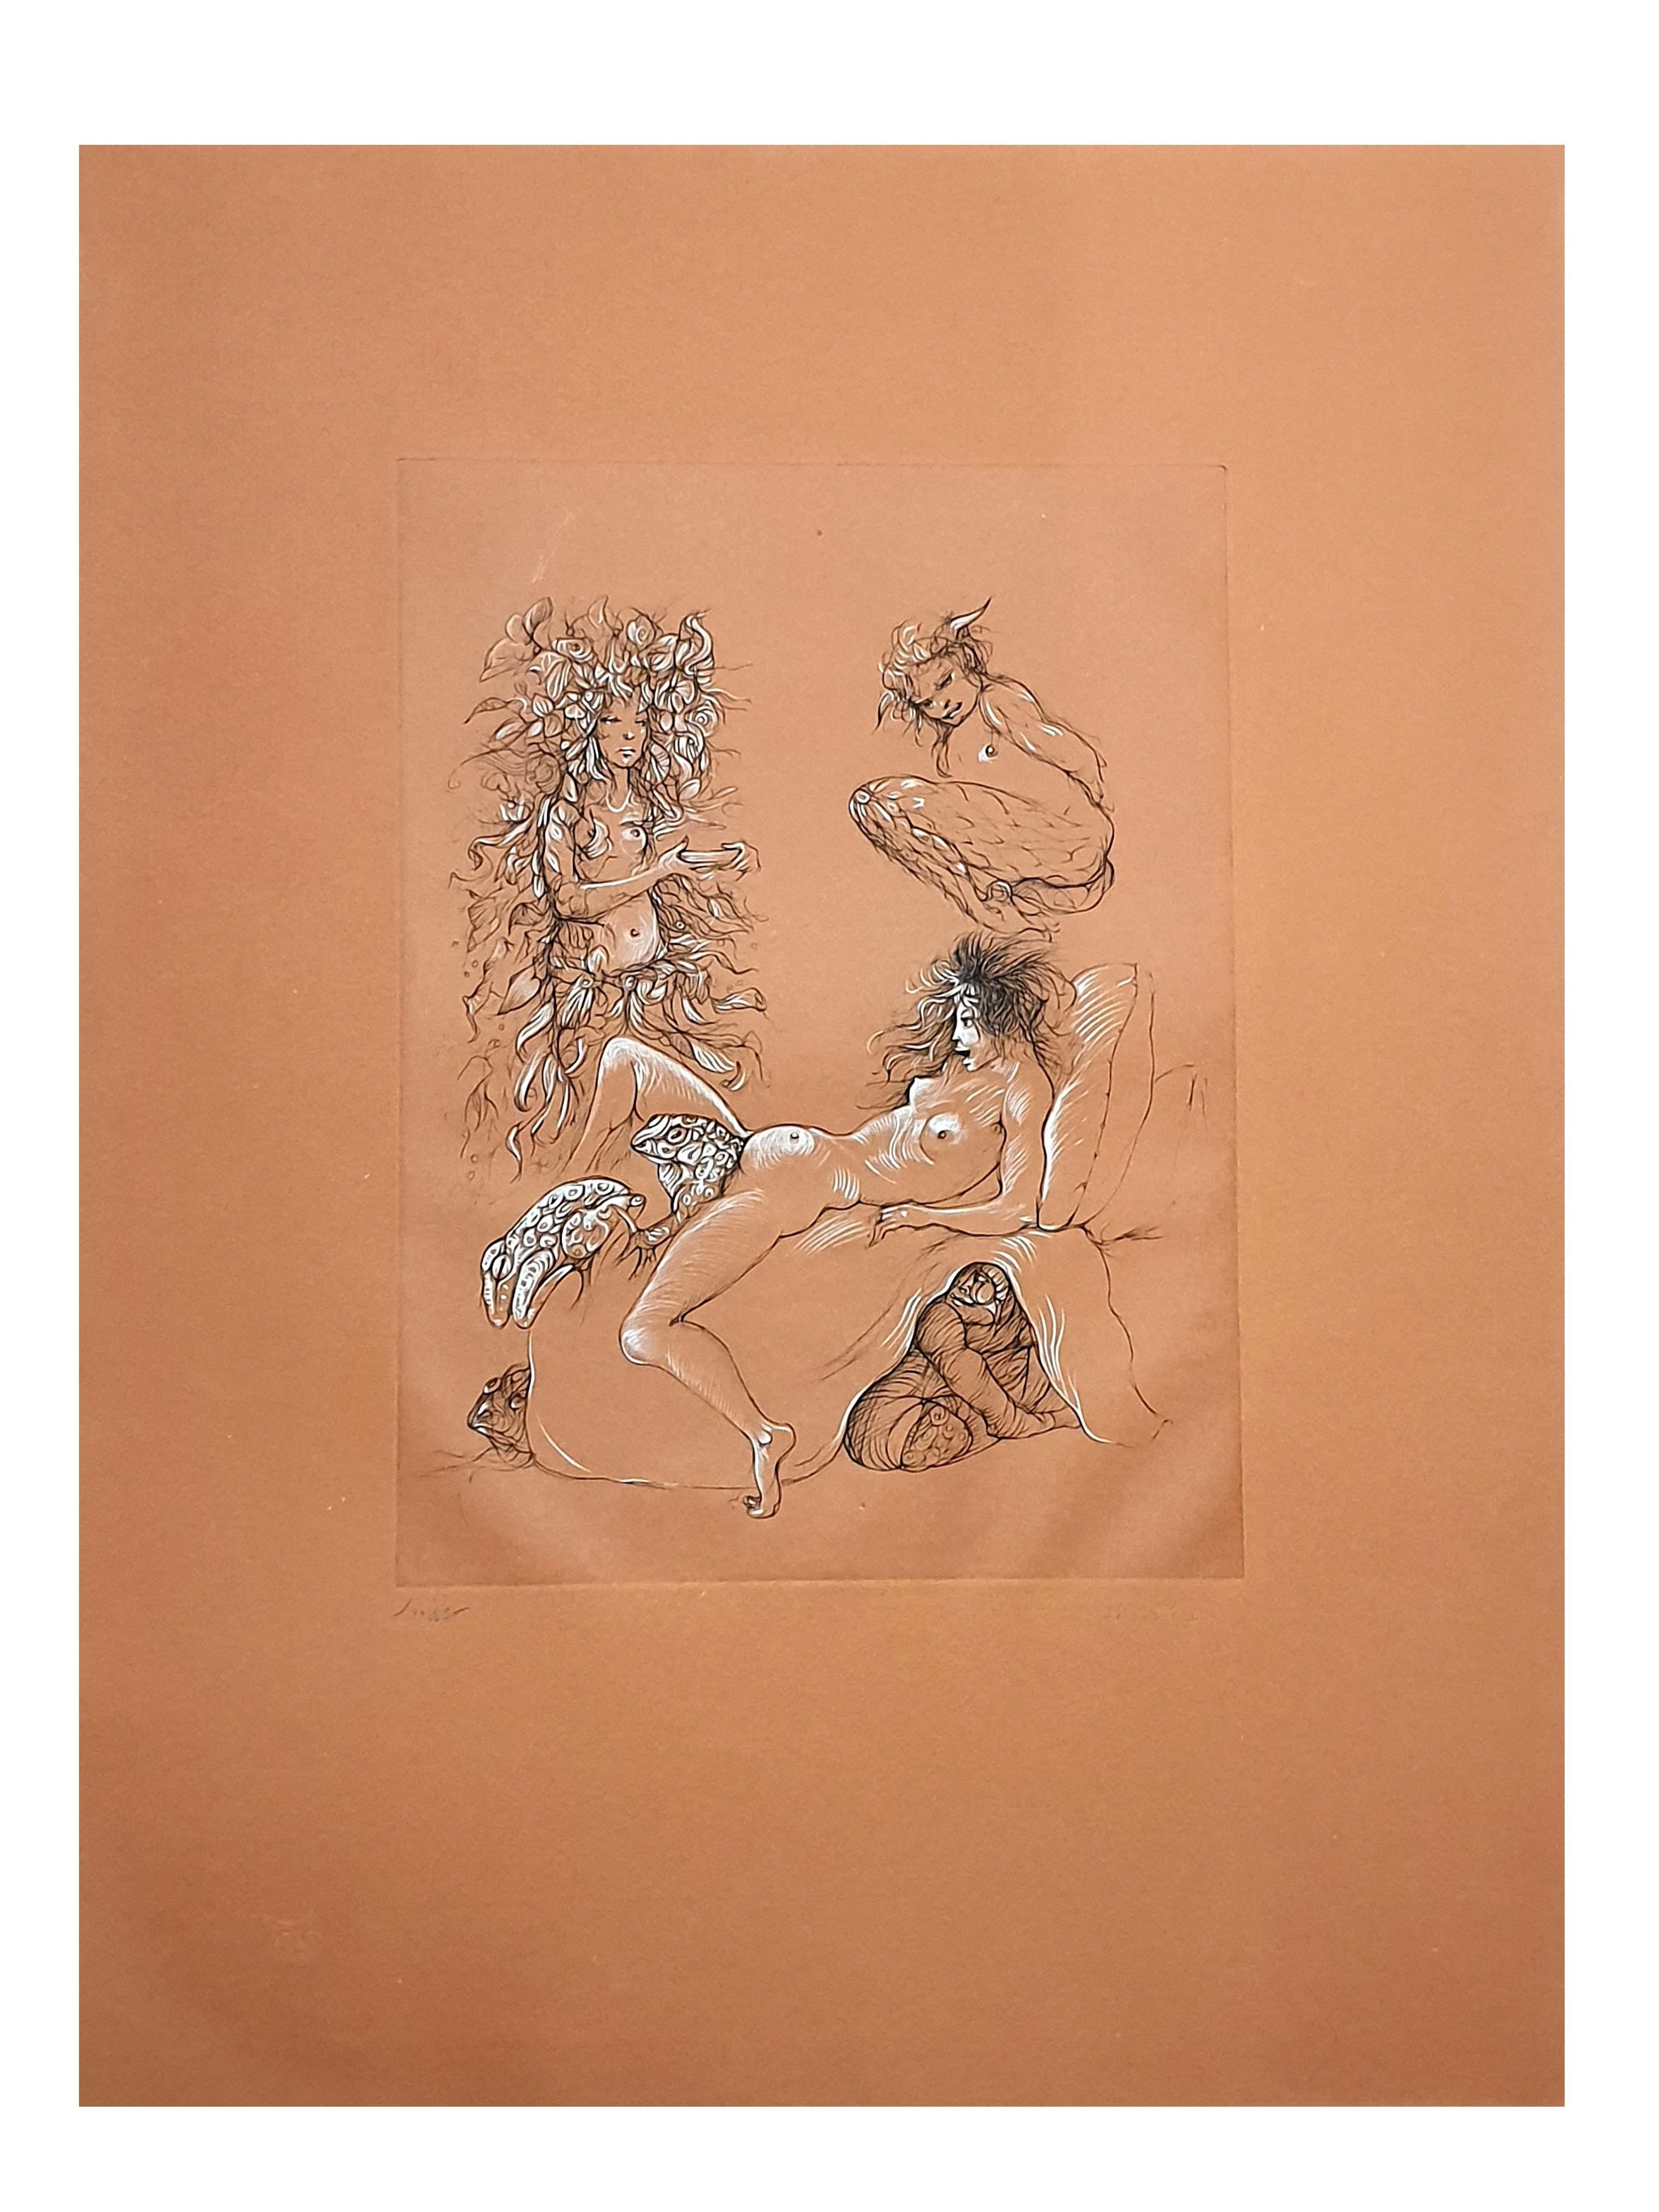 Leonor Fini - Toads - Original Handsigned Lithograph
Circa 1982
On colored paper
Handsigned and Numbered
Edition: 275
Dimensions: 69 x 52.5 cm 